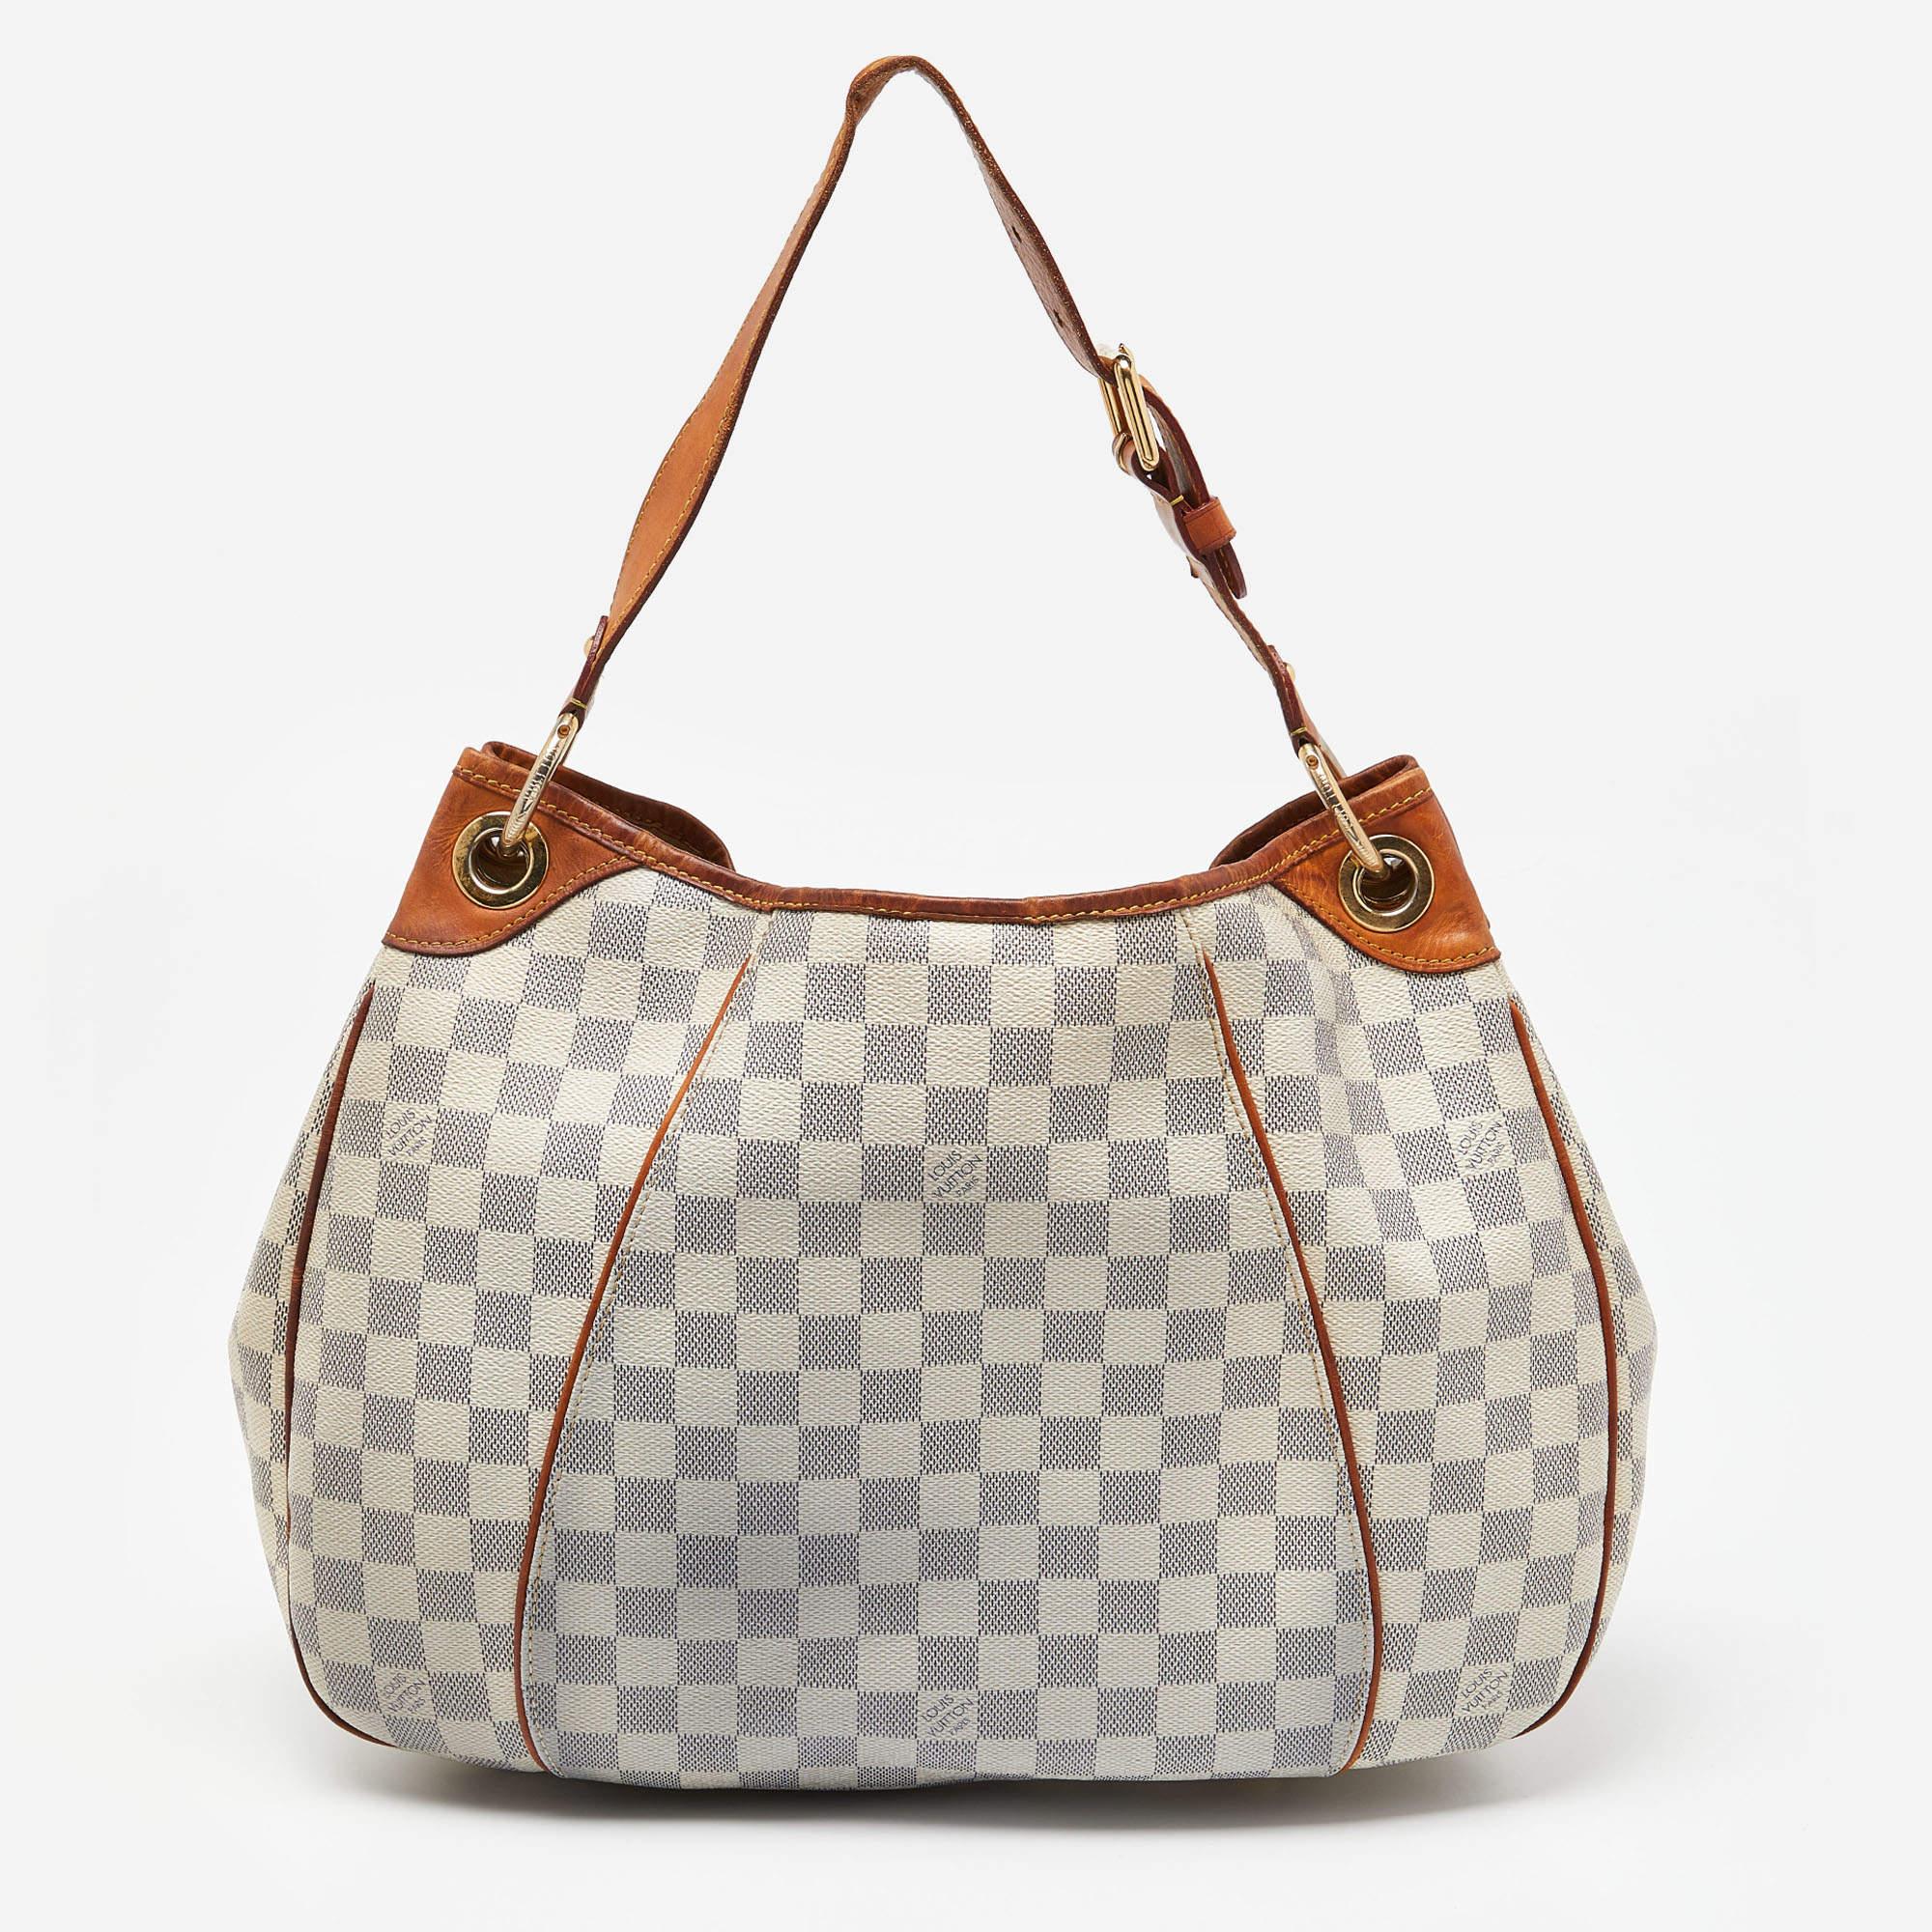 This Louis Vuitton bag for women is super classy and functional, perfect for everyday use. We like the simple details and its high-quality finish.

